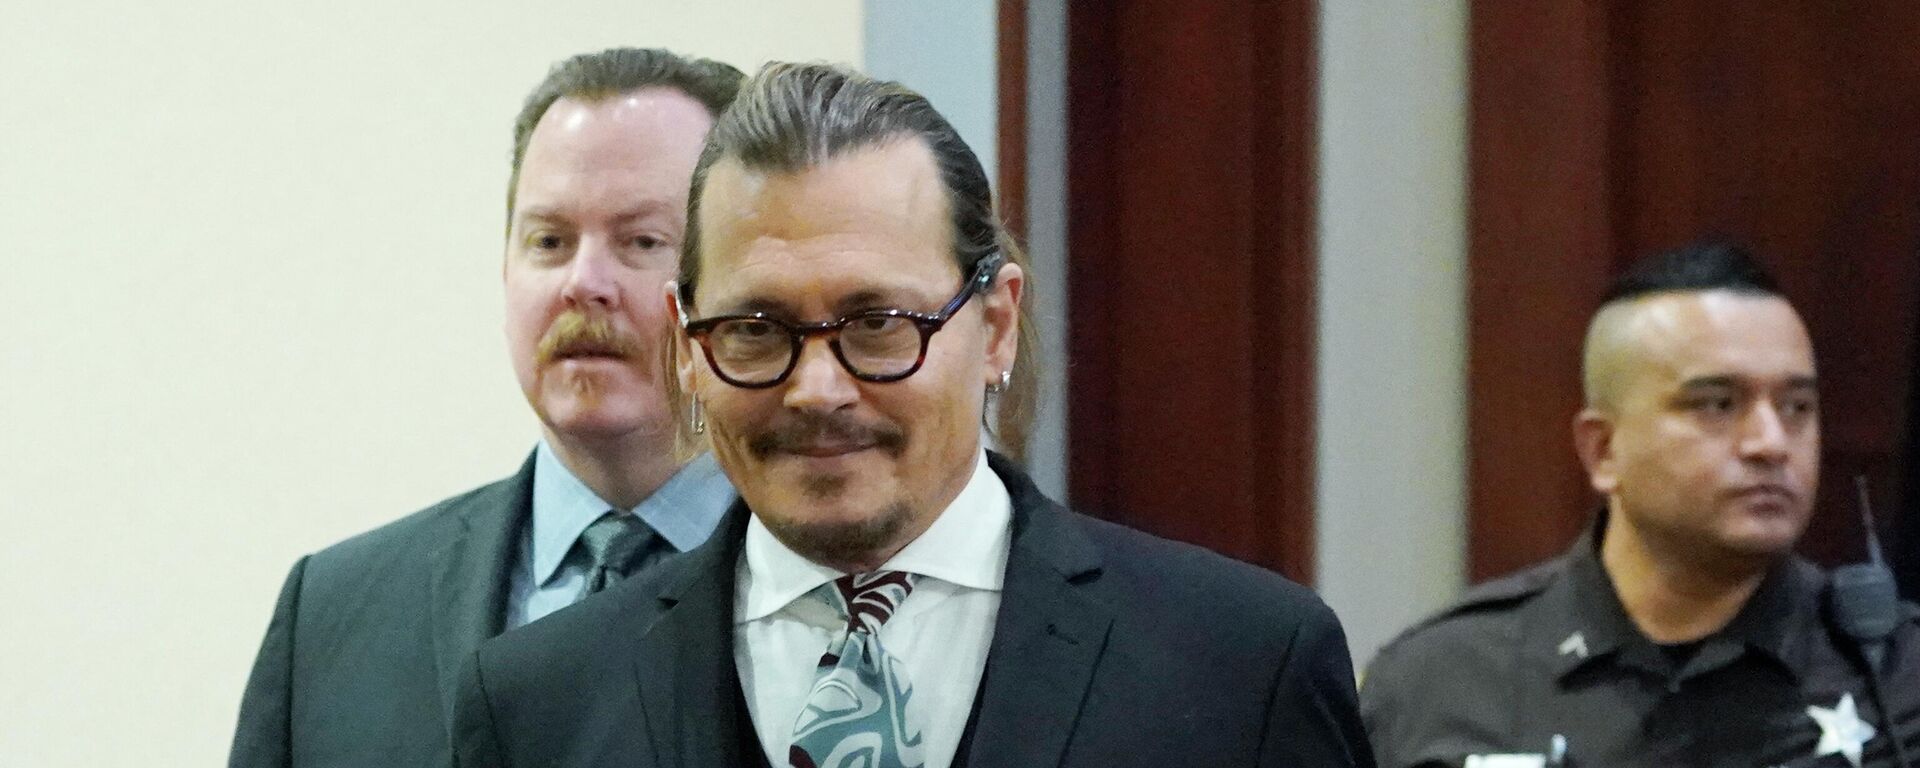 Actor Johnny Depp arrives in the courtroom after a lunch break at the Fairfax County Circuit Courthouse in Fairfax, Virginia, on April 18, 2022 - Sputnik International, 1920, 19.04.2022